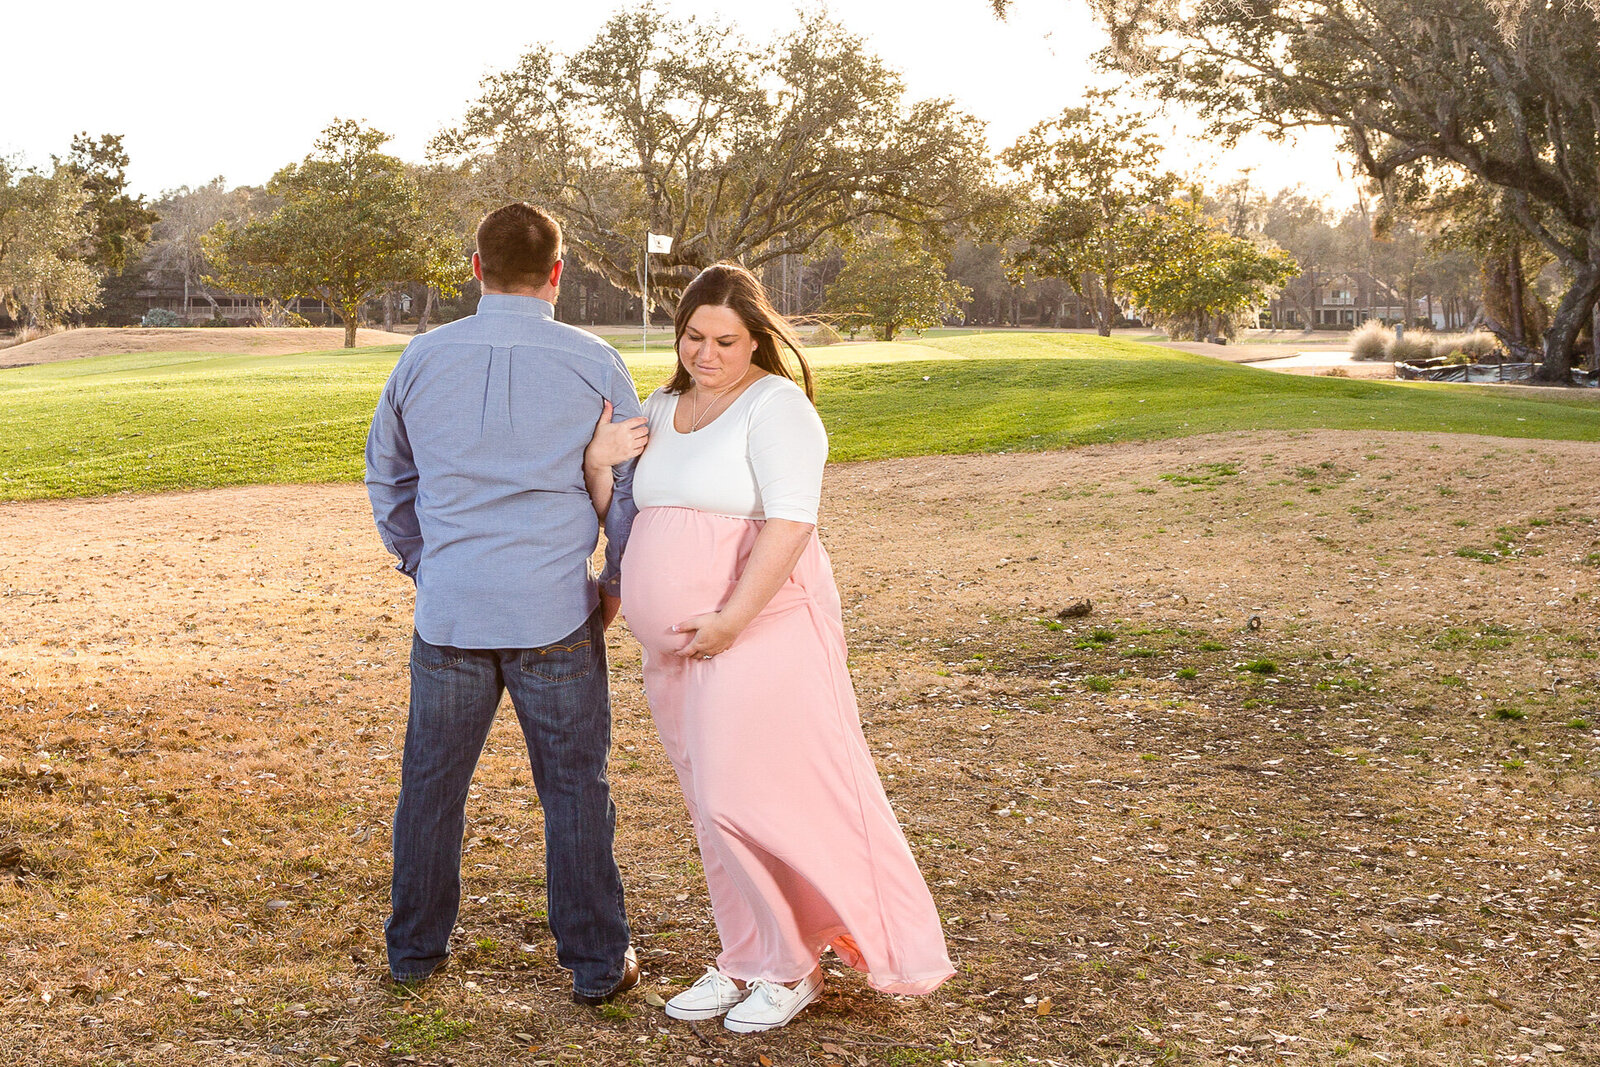 Maternity photo shoot at Pawleys Plantation Golf and Country club with Ron Schroll Photography in Pawleys Island, SC